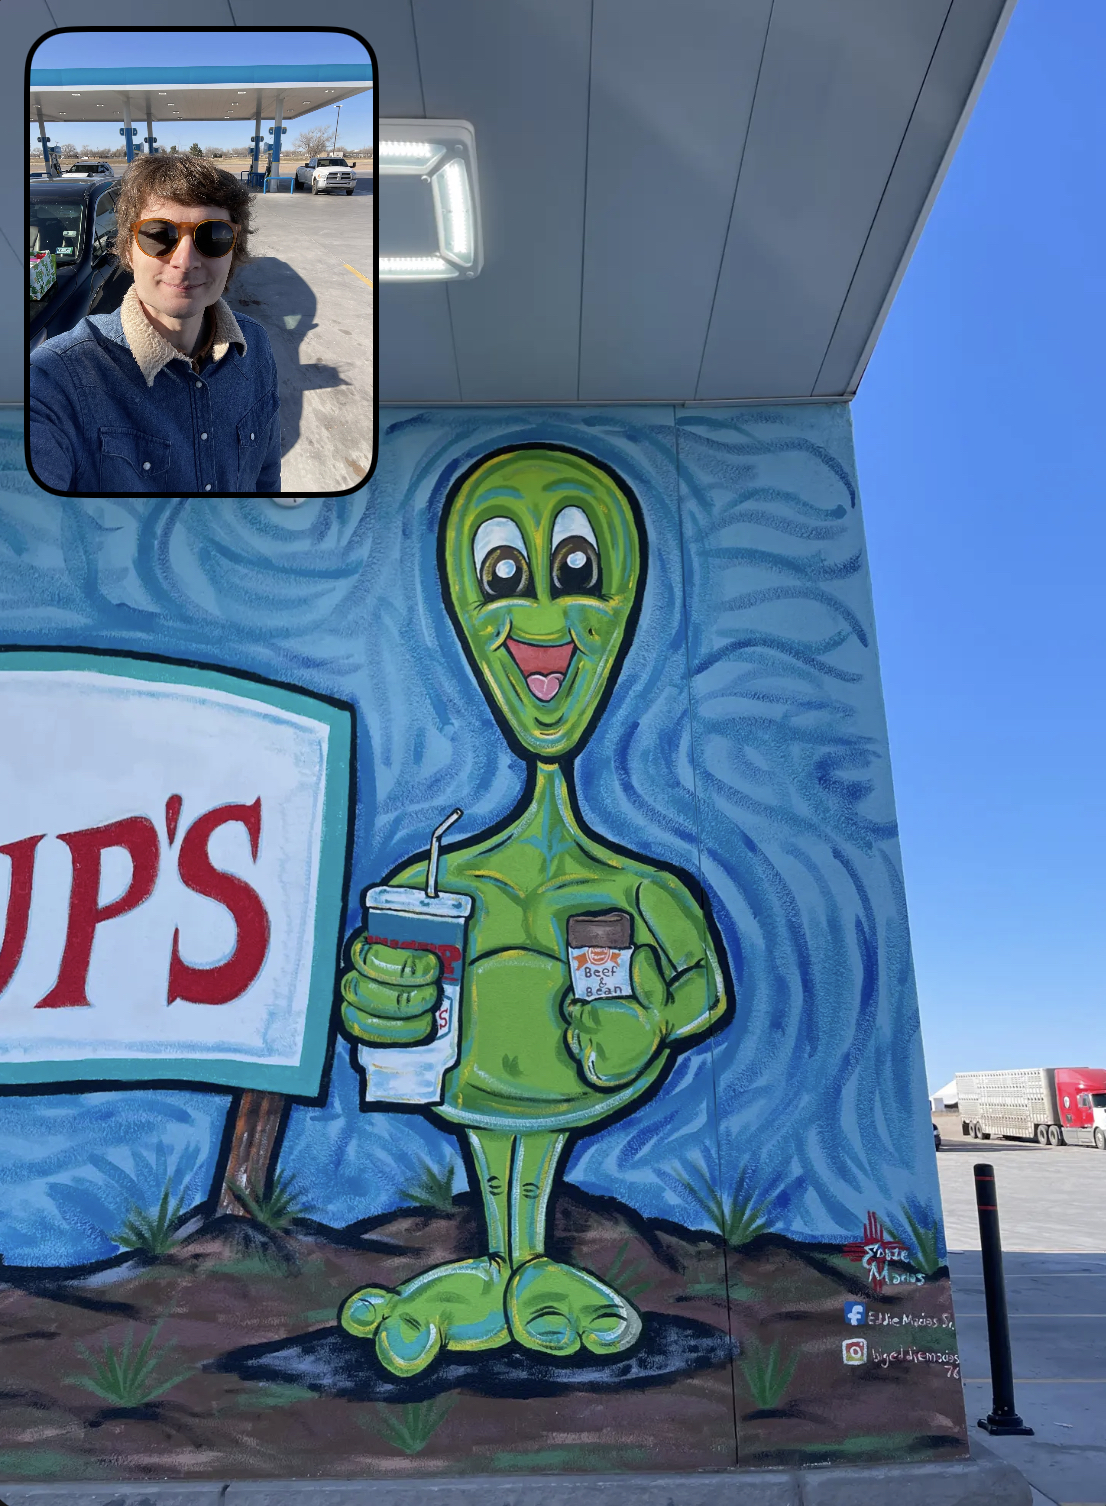 A mural of a cartoonish green alien on the side of a gas station near Roswell, New Mexico, with a selfie of me superimposed on the corner of the image.